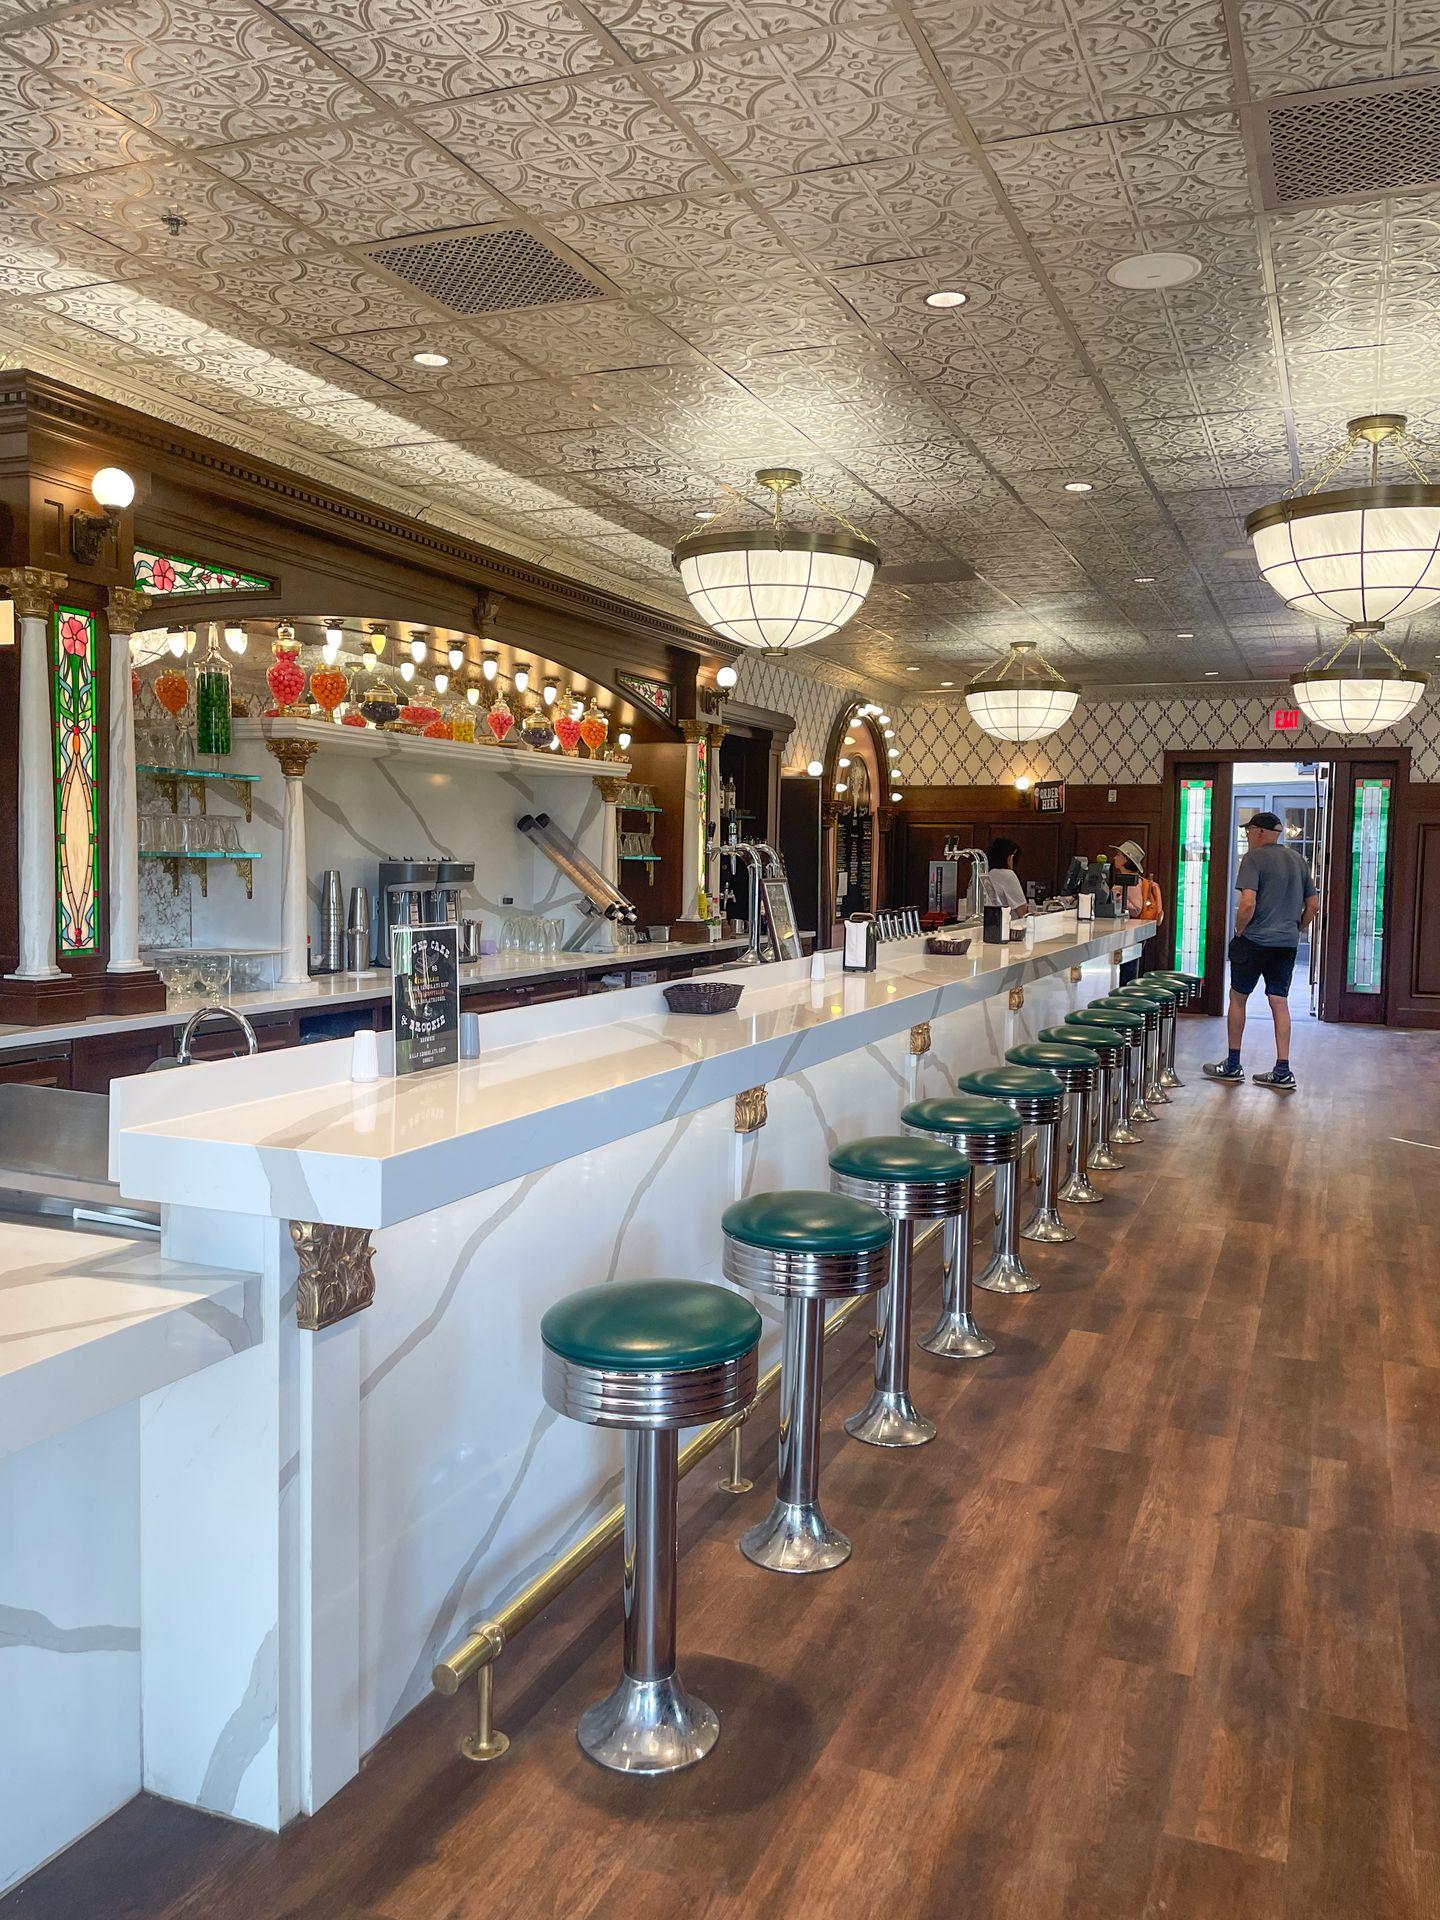 A vintage-looking bar with green bar stools inside the Death Valley Ice Cream Parlor